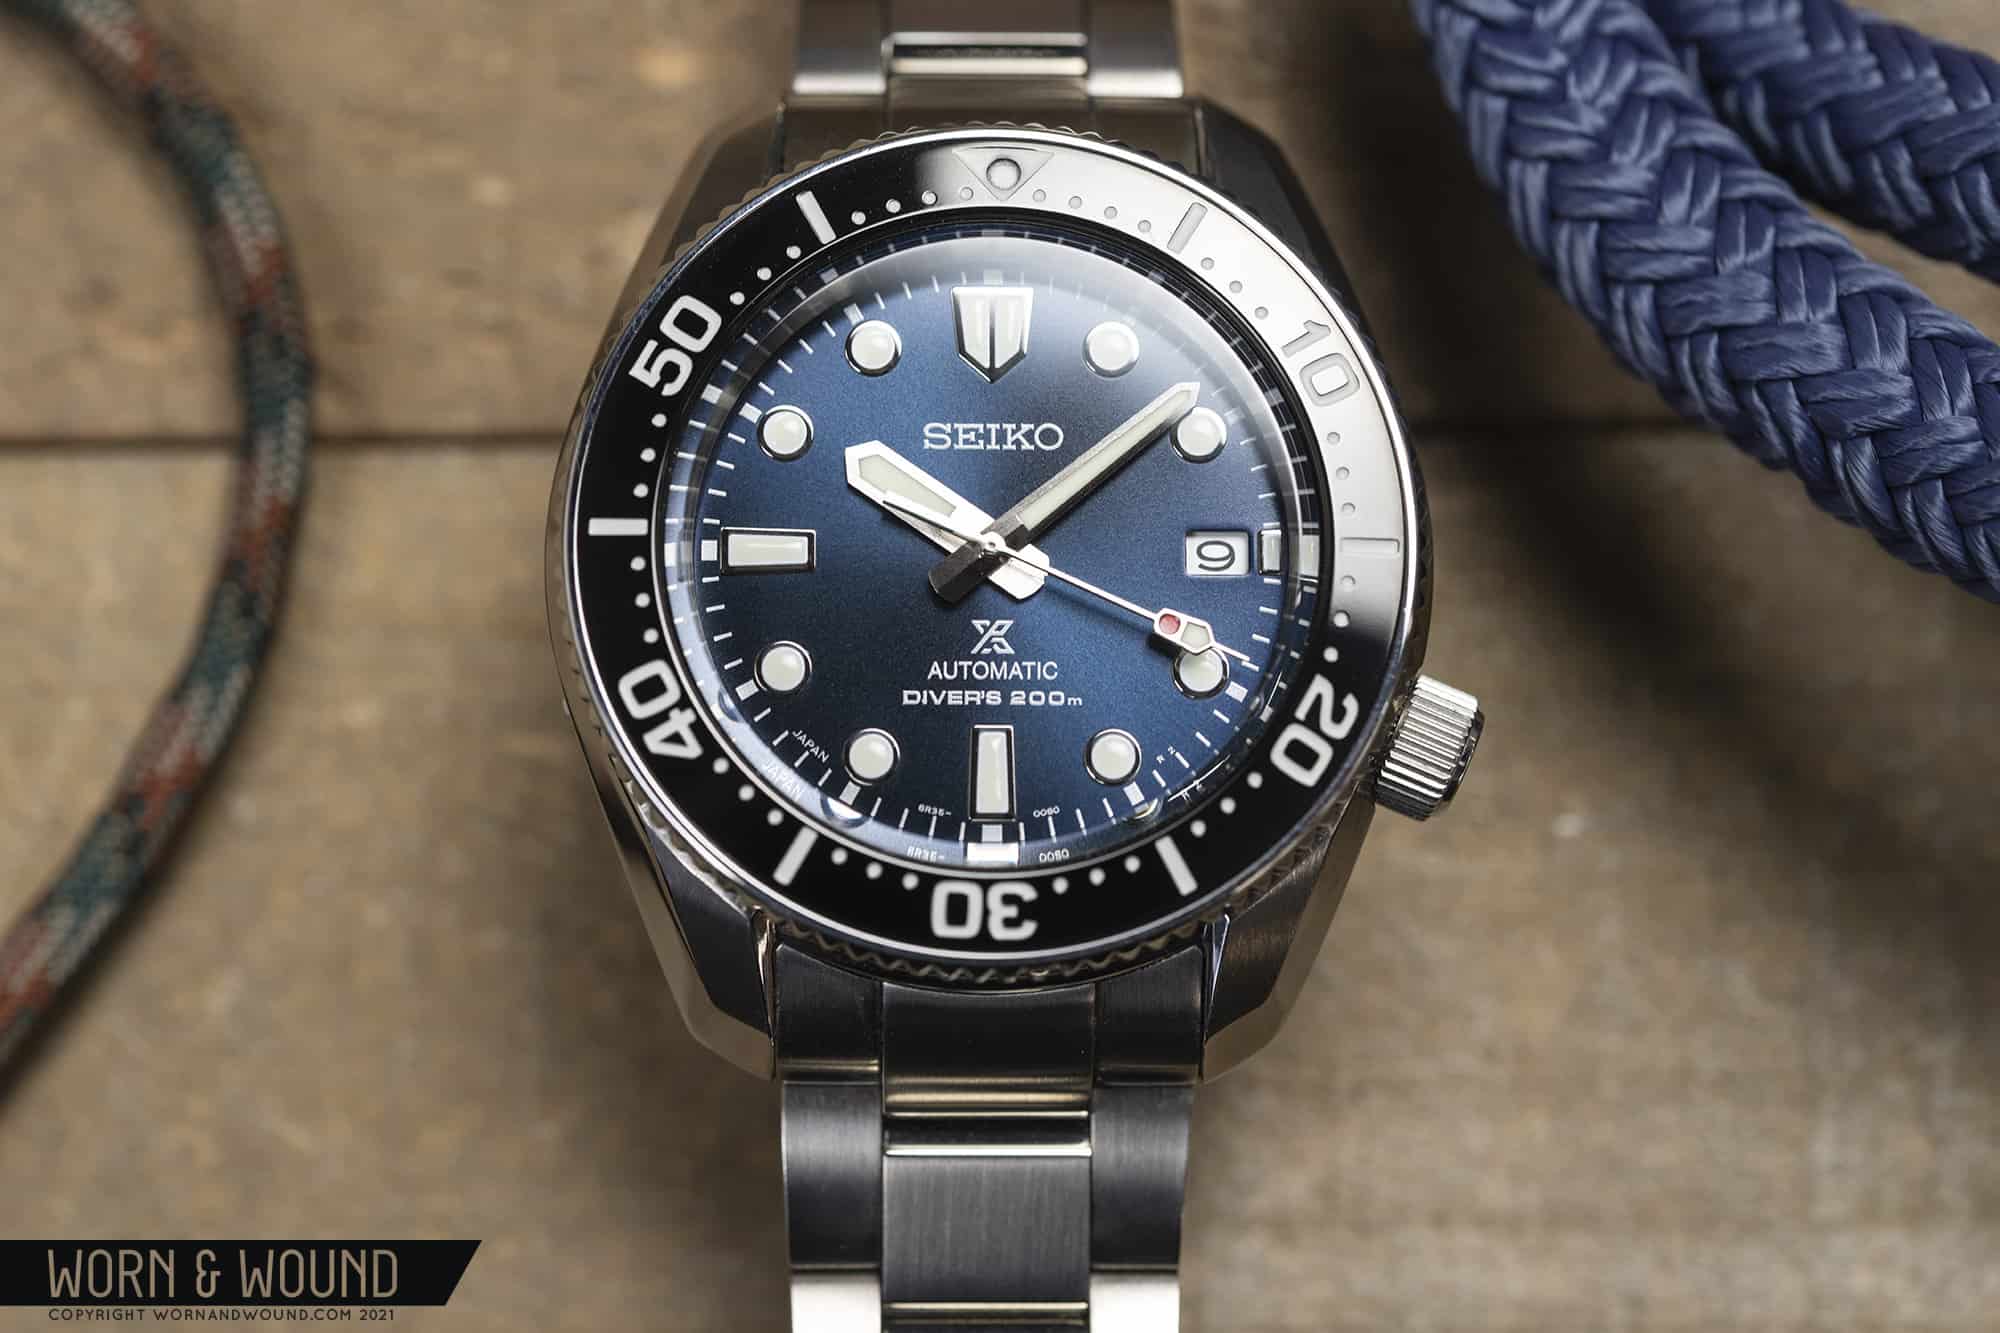 Hands-On With The Seiko Prospex SPB187 - Worn & Wound